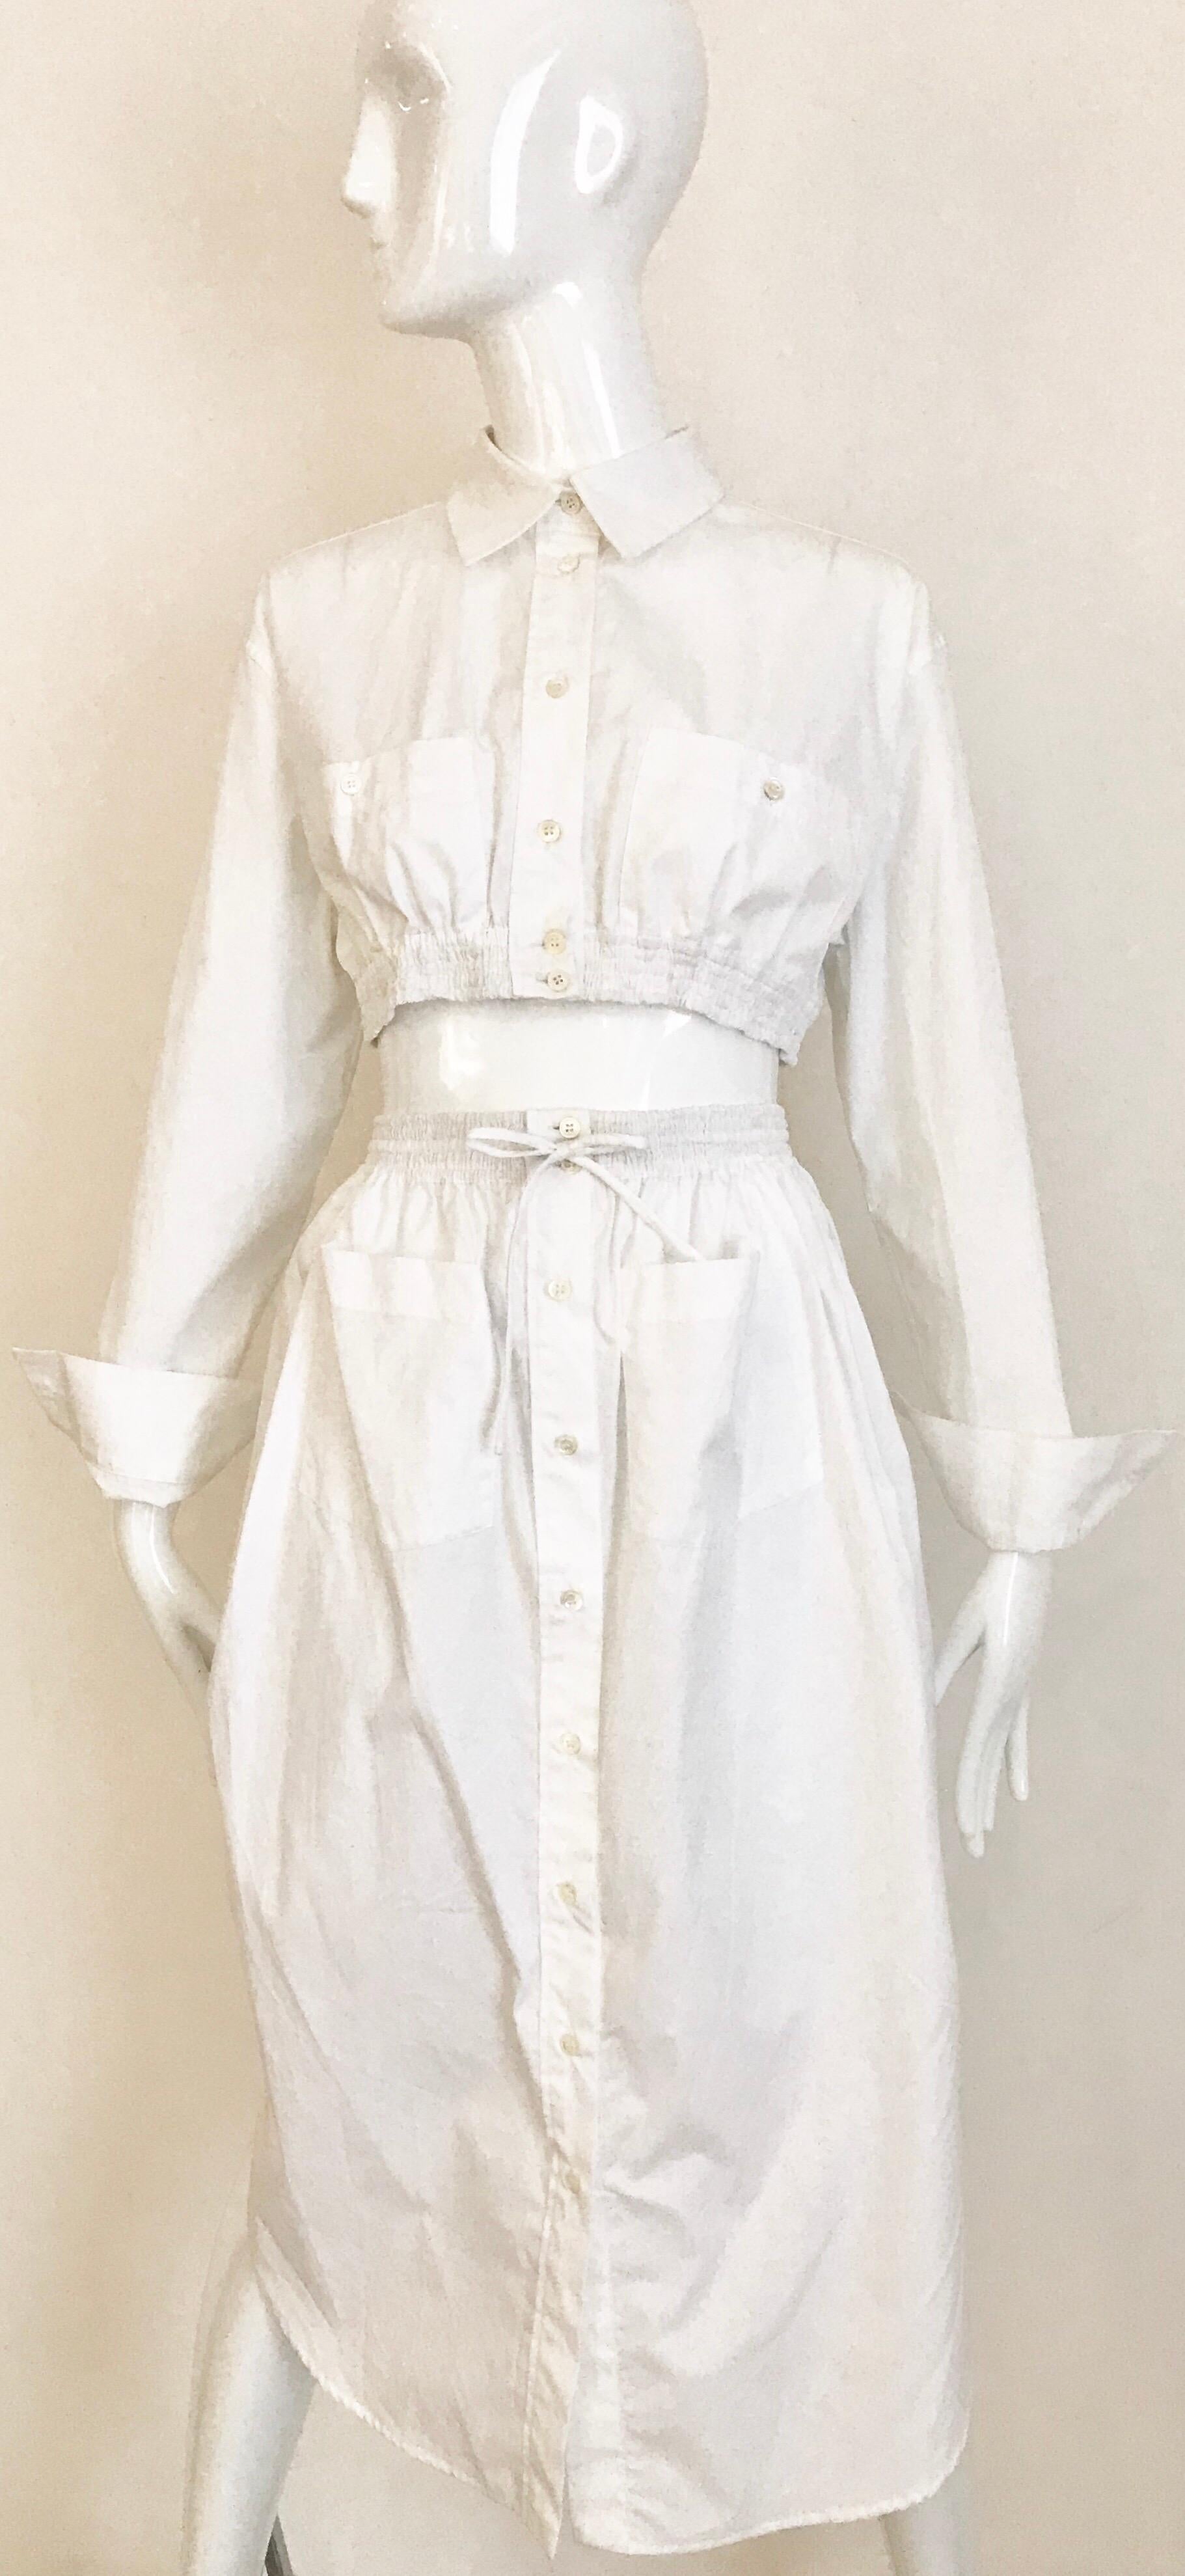 Jean Paul Gaultier White Cotton Crop Top and Skirt 1